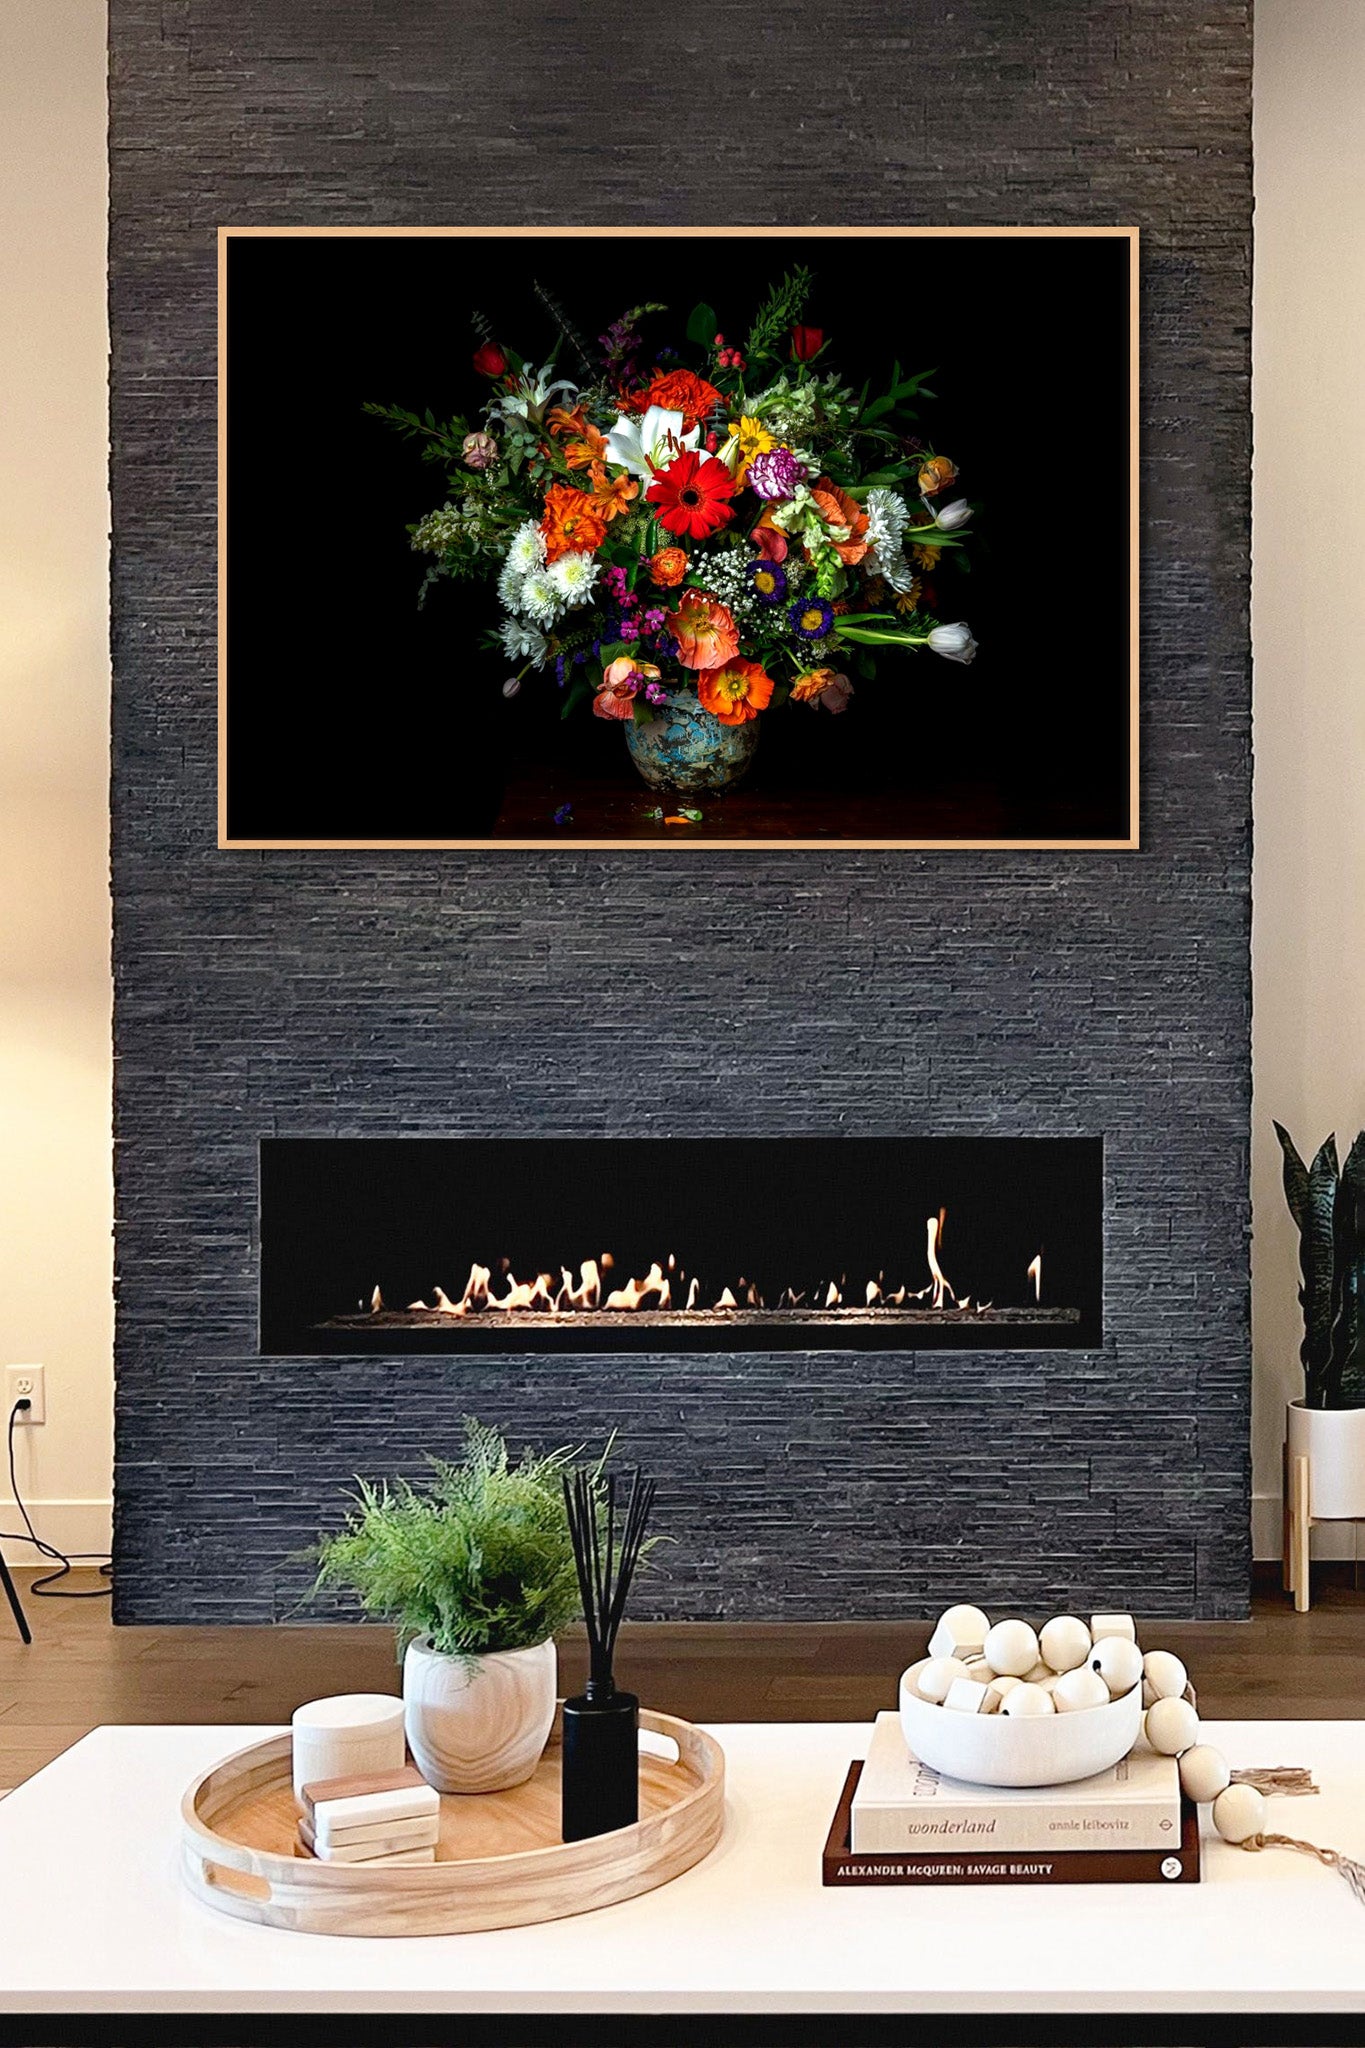 A picture hanging on the wall of a living room. There is a table and fireplace with a fire burning.. The picture is a metal print from Dreaux Fine Art of "A Generous Gift." "Generous Gift" is a photograph of a bouquet of various types of flowers on a black background.